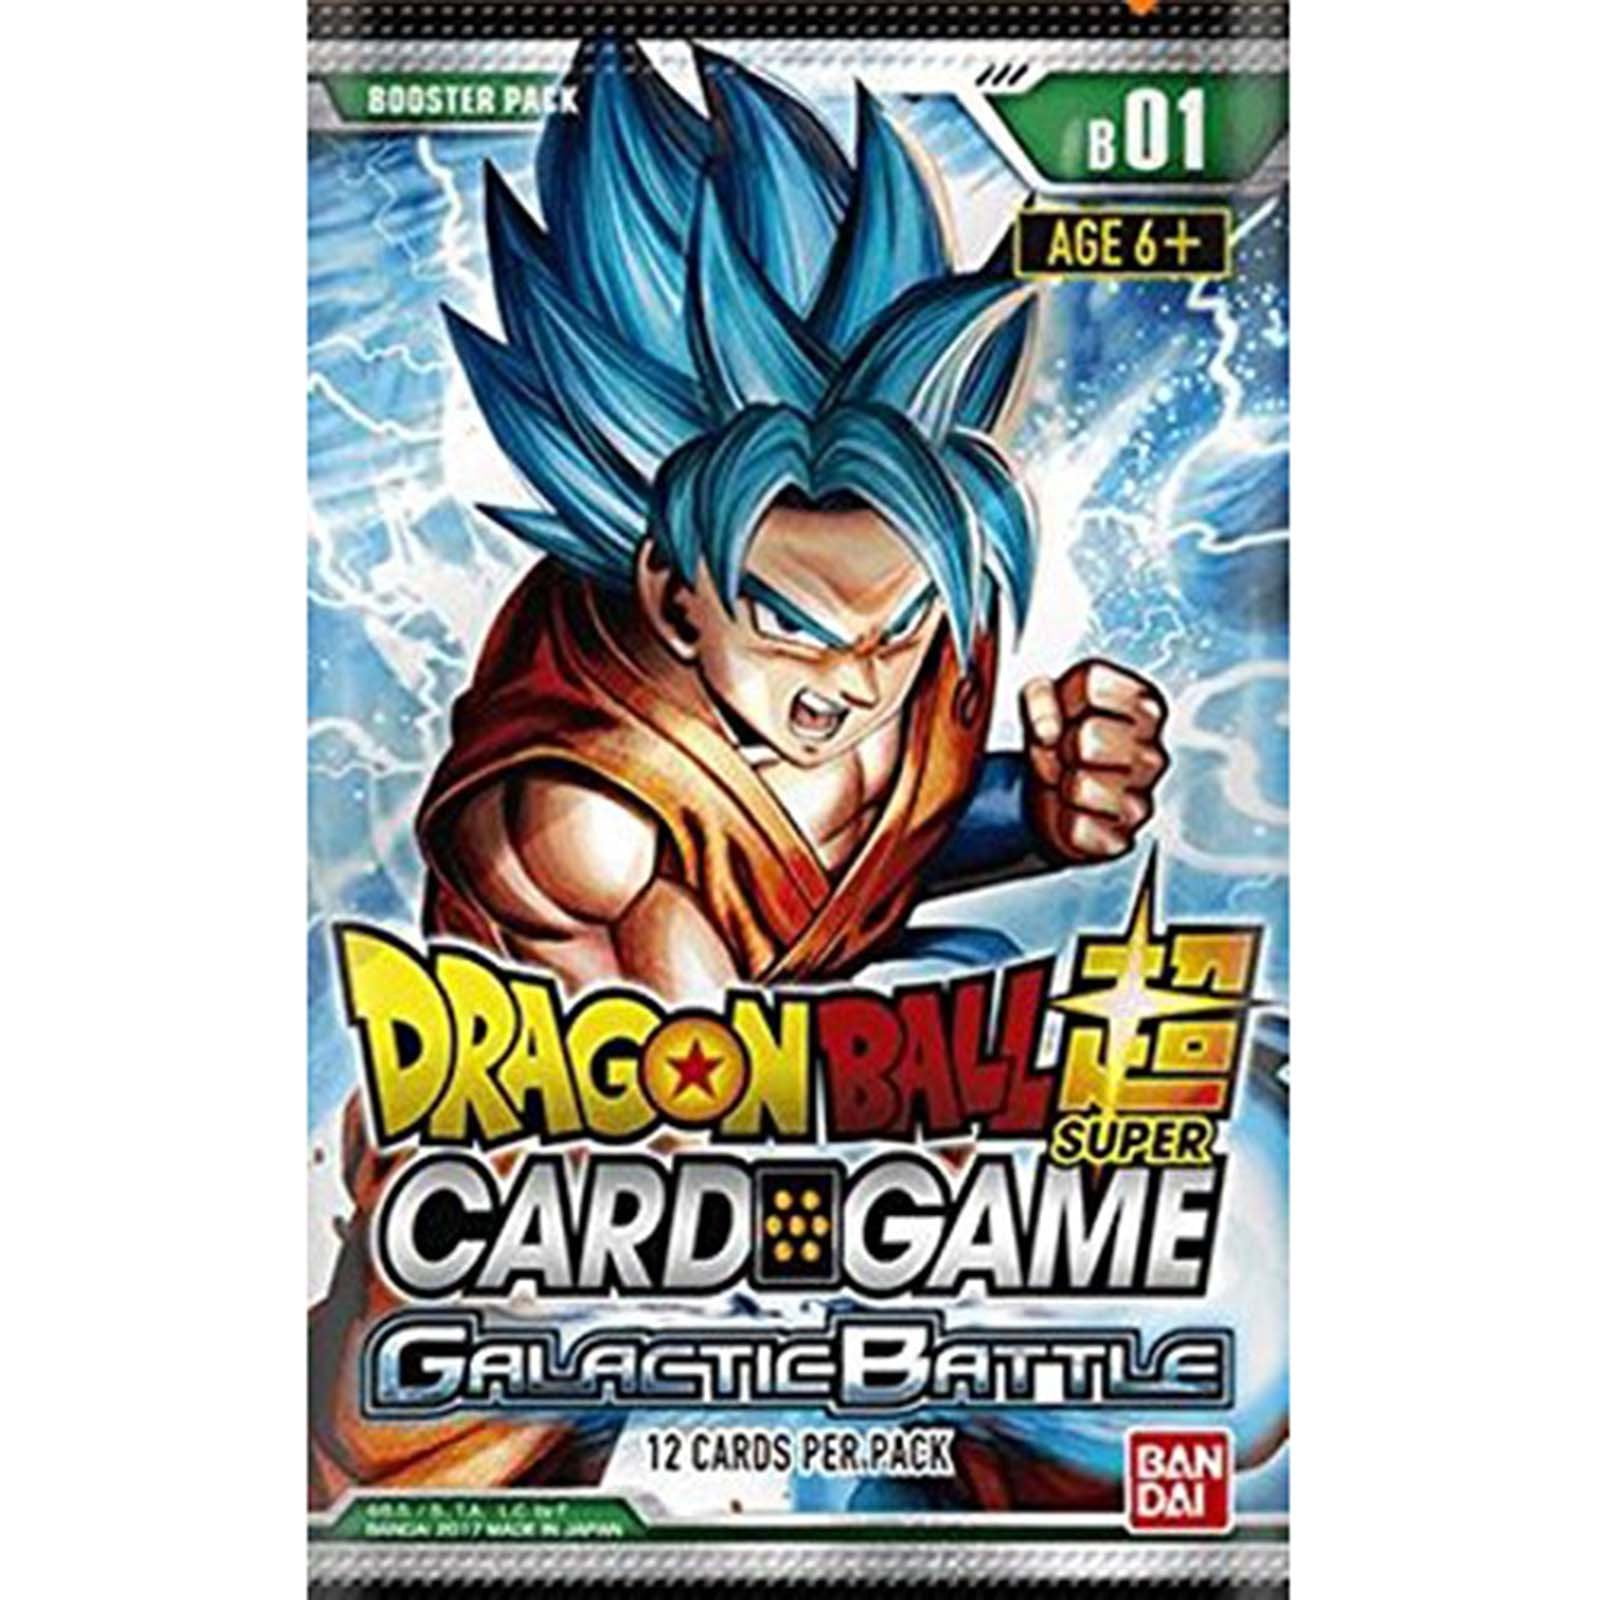 Vengeance Movie Collection 1152 booster packs 48x Dragon Ball Z booster boxes 